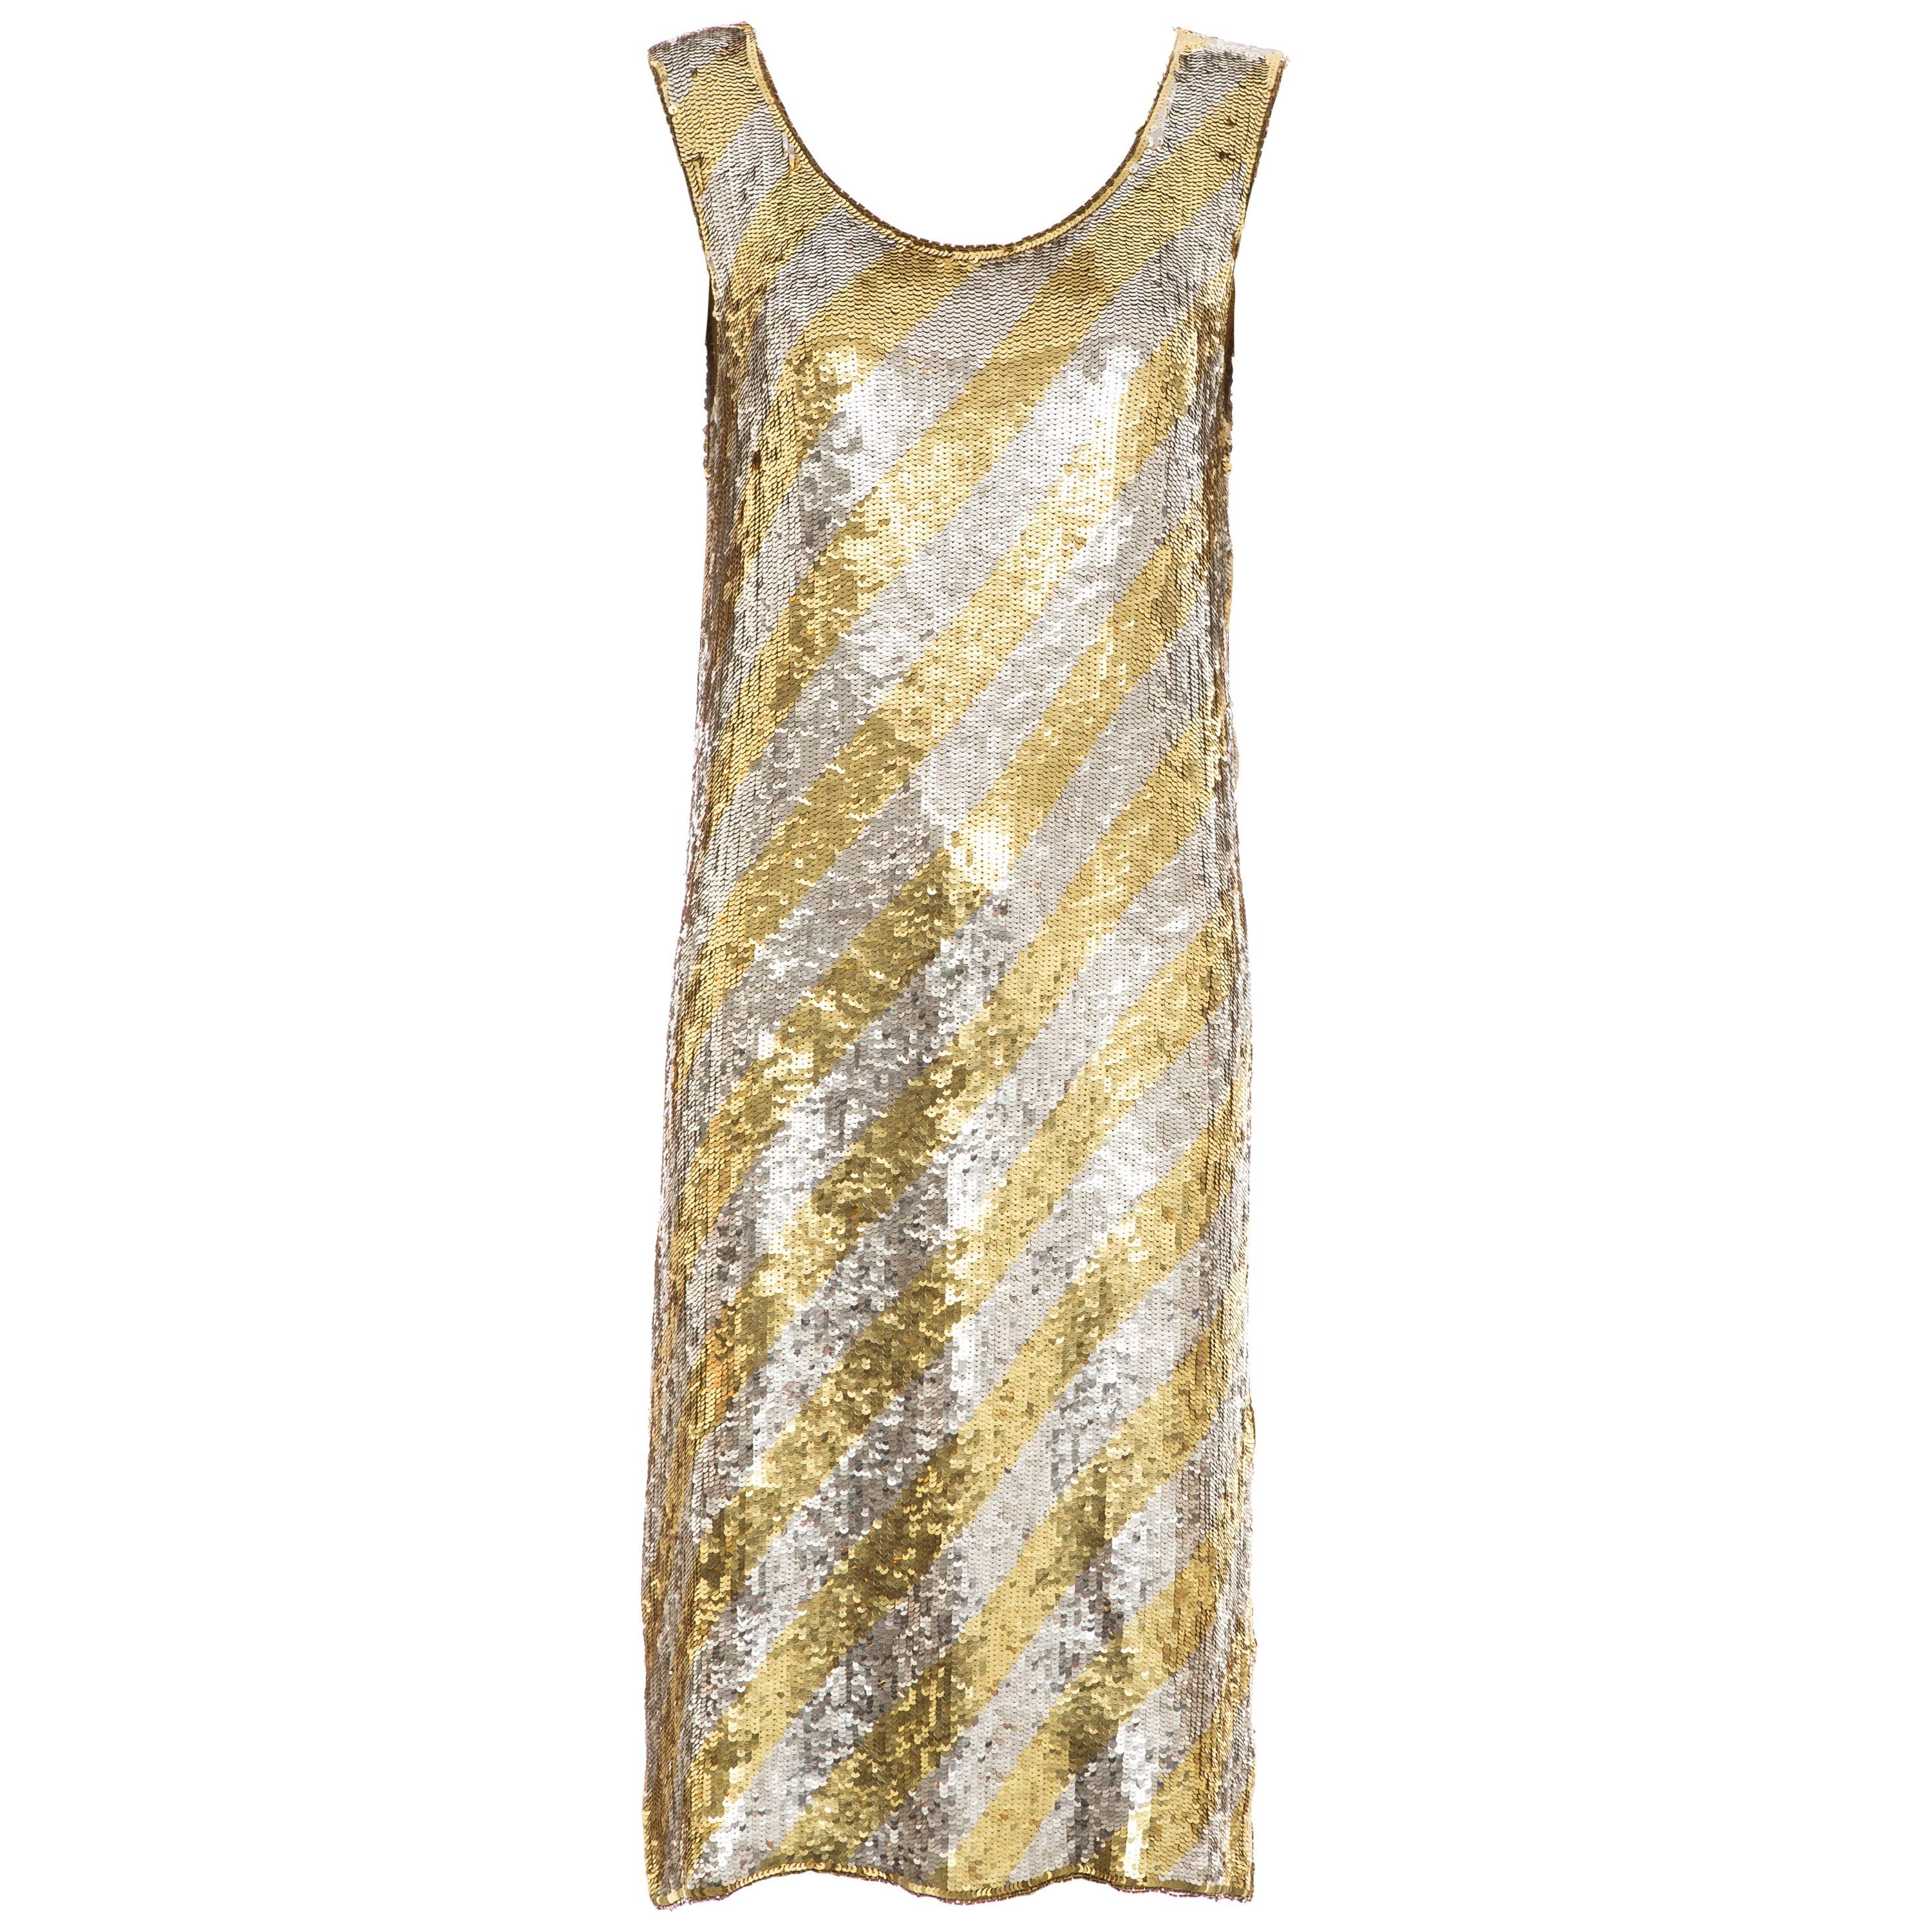  Marc Bohan for Christian Dior Embroidered Sequin Dress, Circa 1970s For Sale